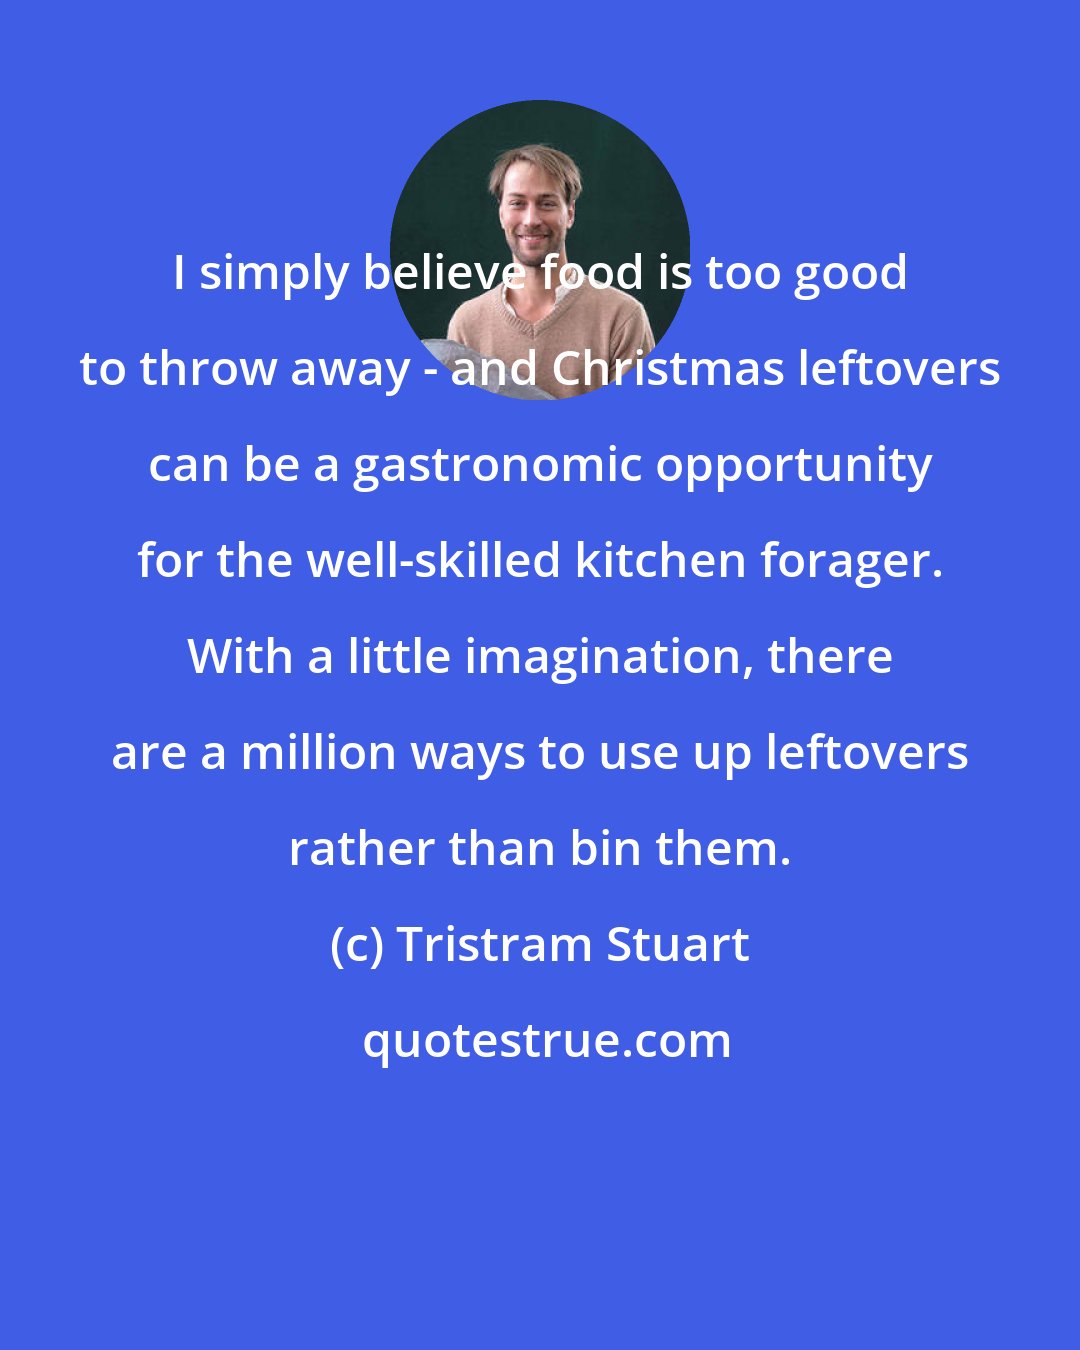 Tristram Stuart: I simply believe food is too good to throw away - and Christmas leftovers can be a gastronomic opportunity for the well-skilled kitchen forager. With a little imagination, there are a million ways to use up leftovers rather than bin them.